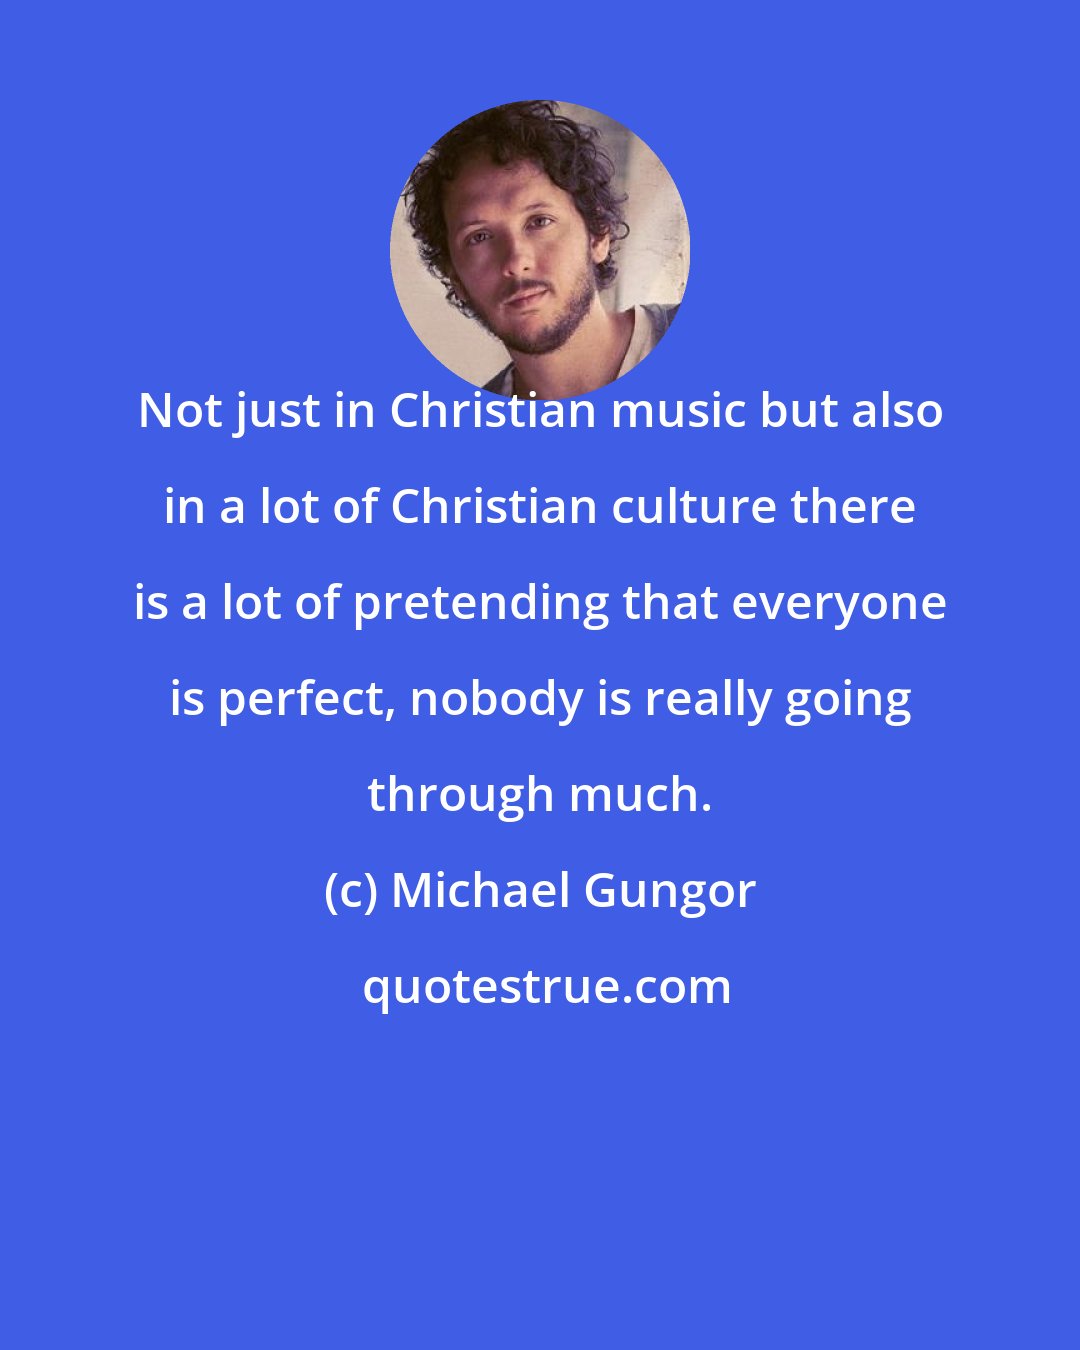 Michael Gungor: Not just in Christian music but also in a lot of Christian culture there is a lot of pretending that everyone is perfect, nobody is really going through much.